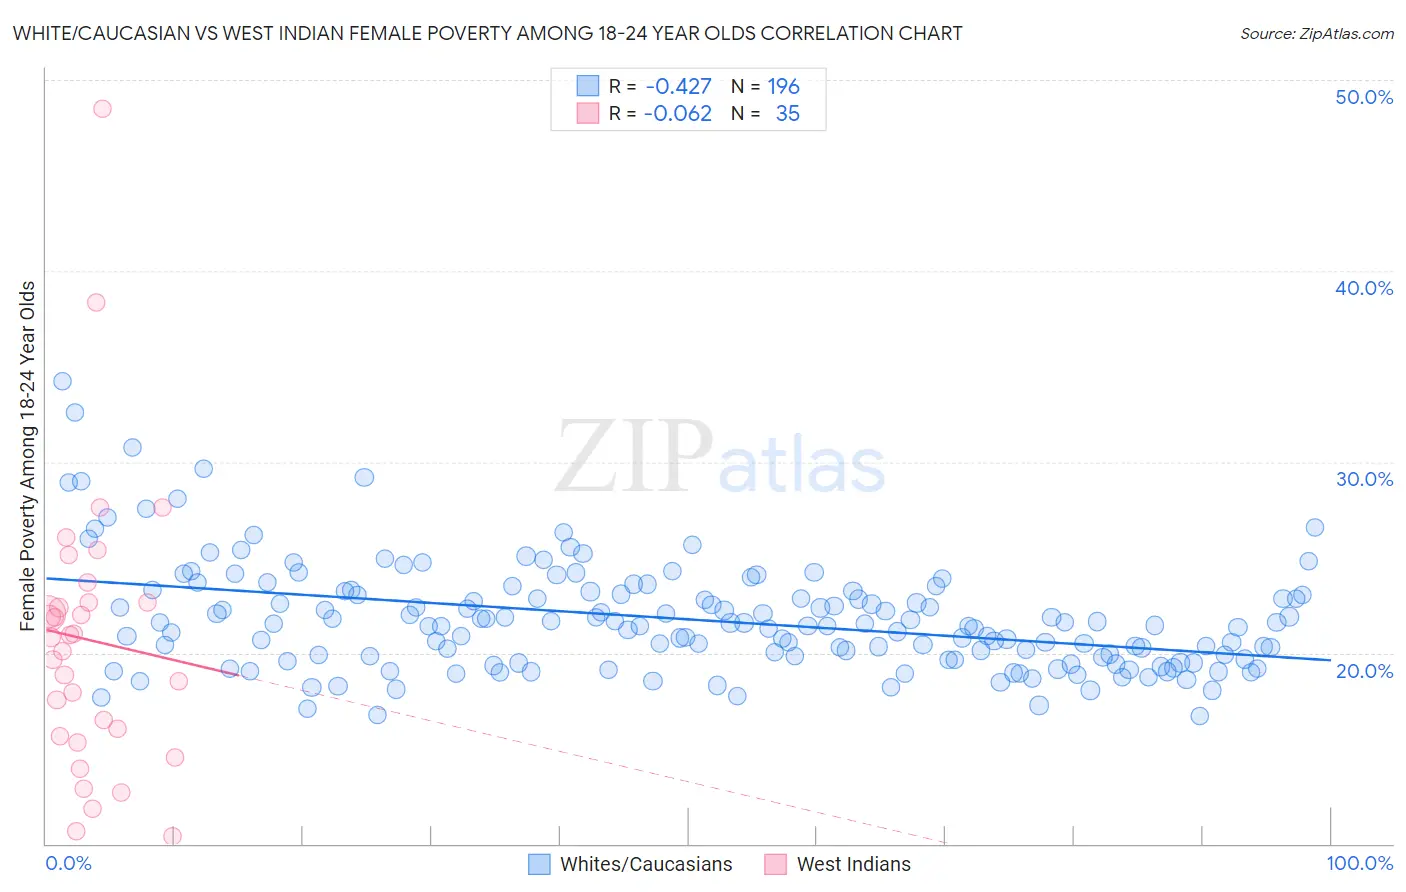 White/Caucasian vs West Indian Female Poverty Among 18-24 Year Olds